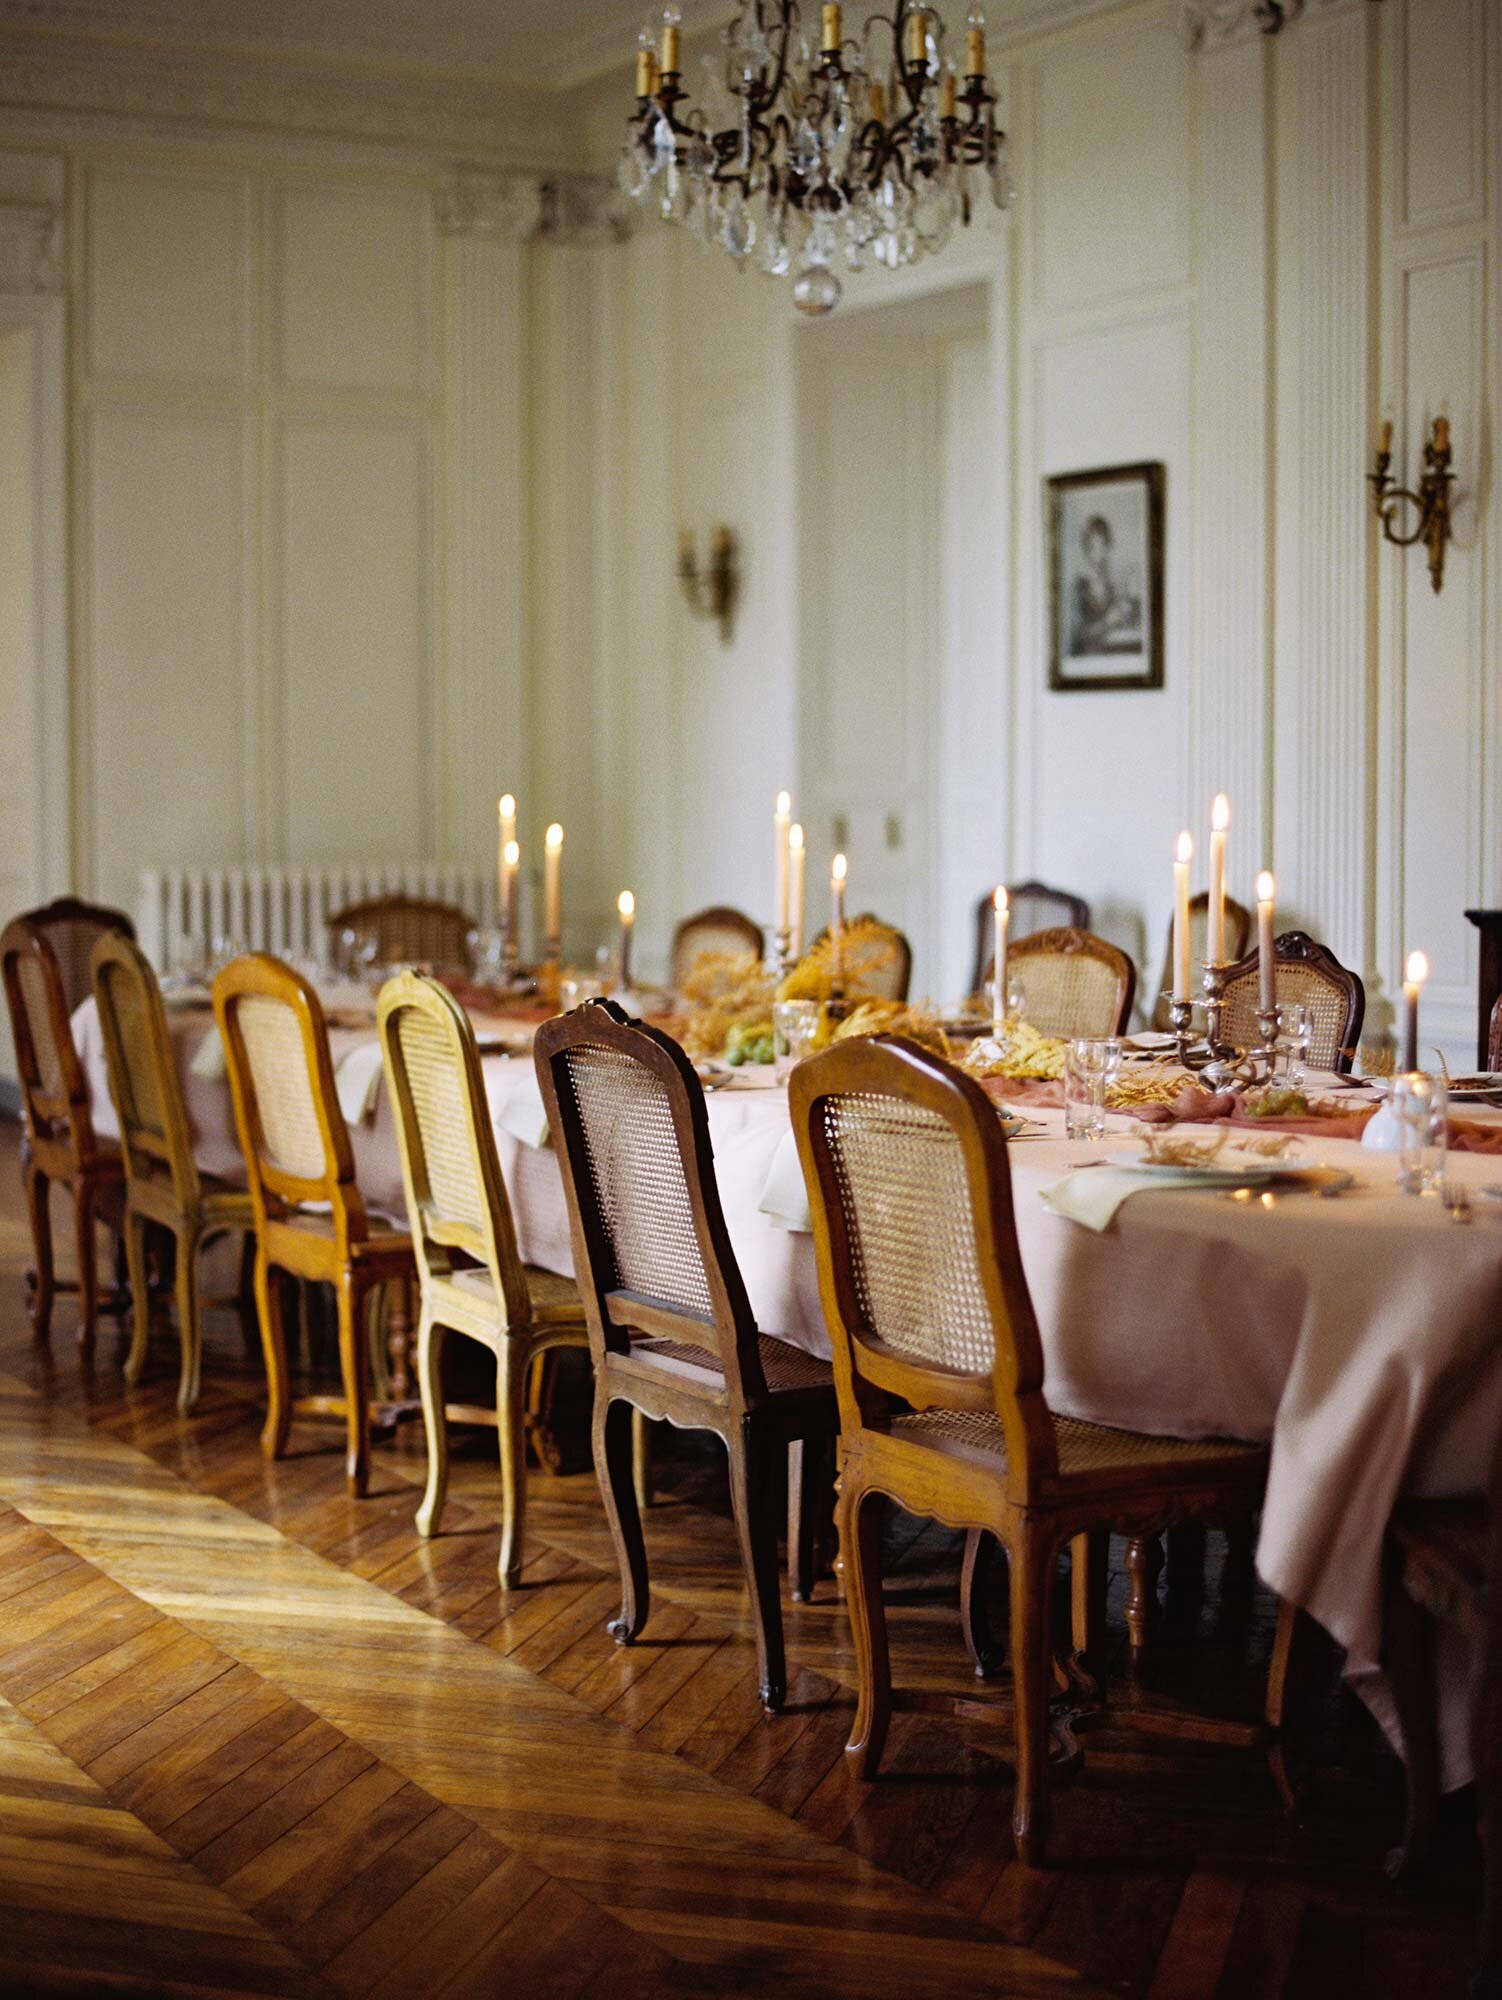 A long dining table decorated ready for a meal during a workshop in the dining room at Chateau de Courtomer.